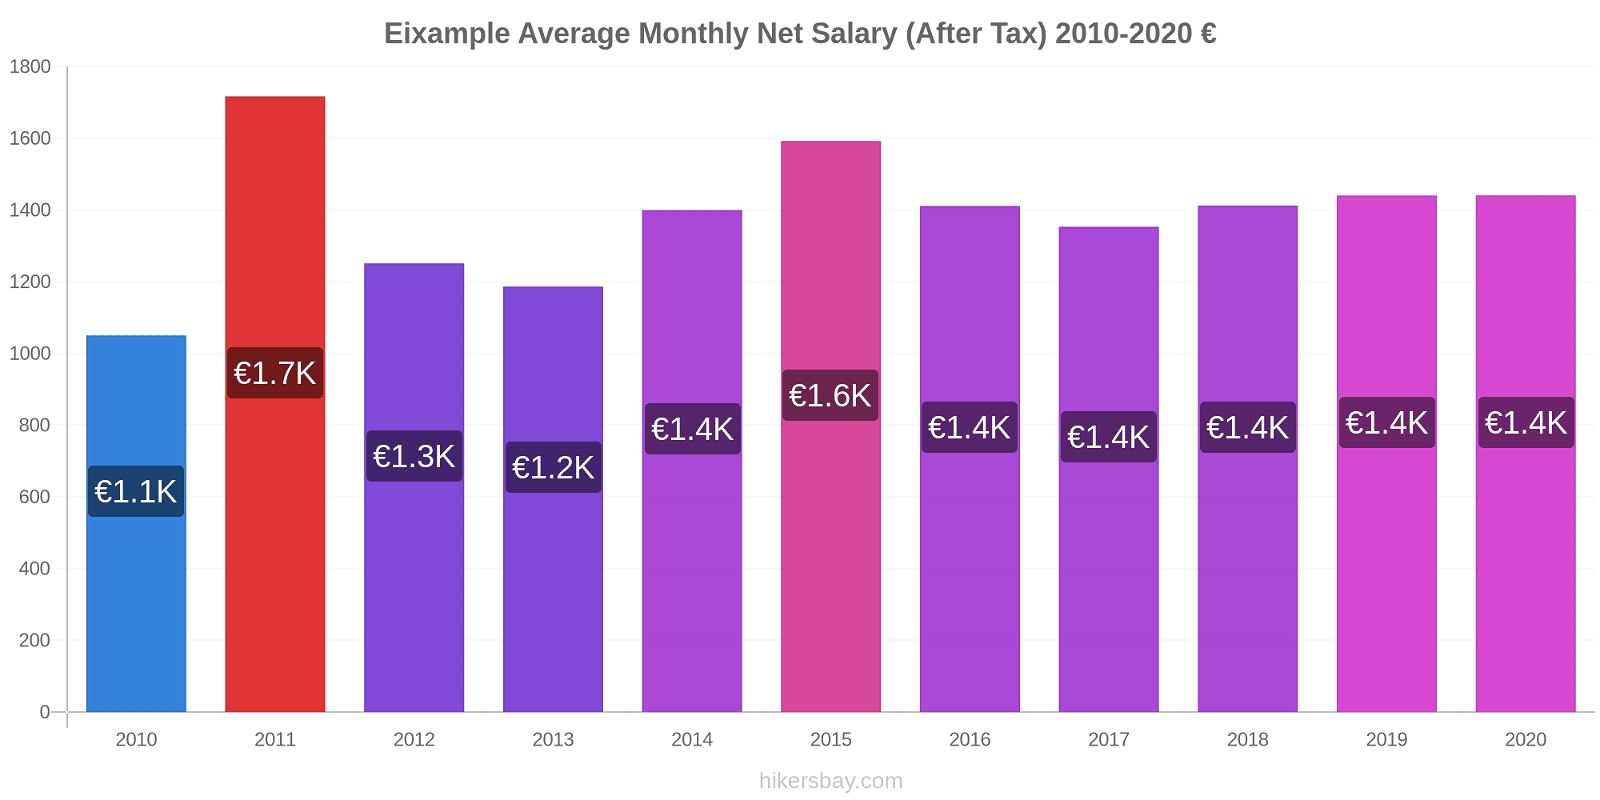 Eixample price changes Average Monthly Net Salary (After Tax) hikersbay.com